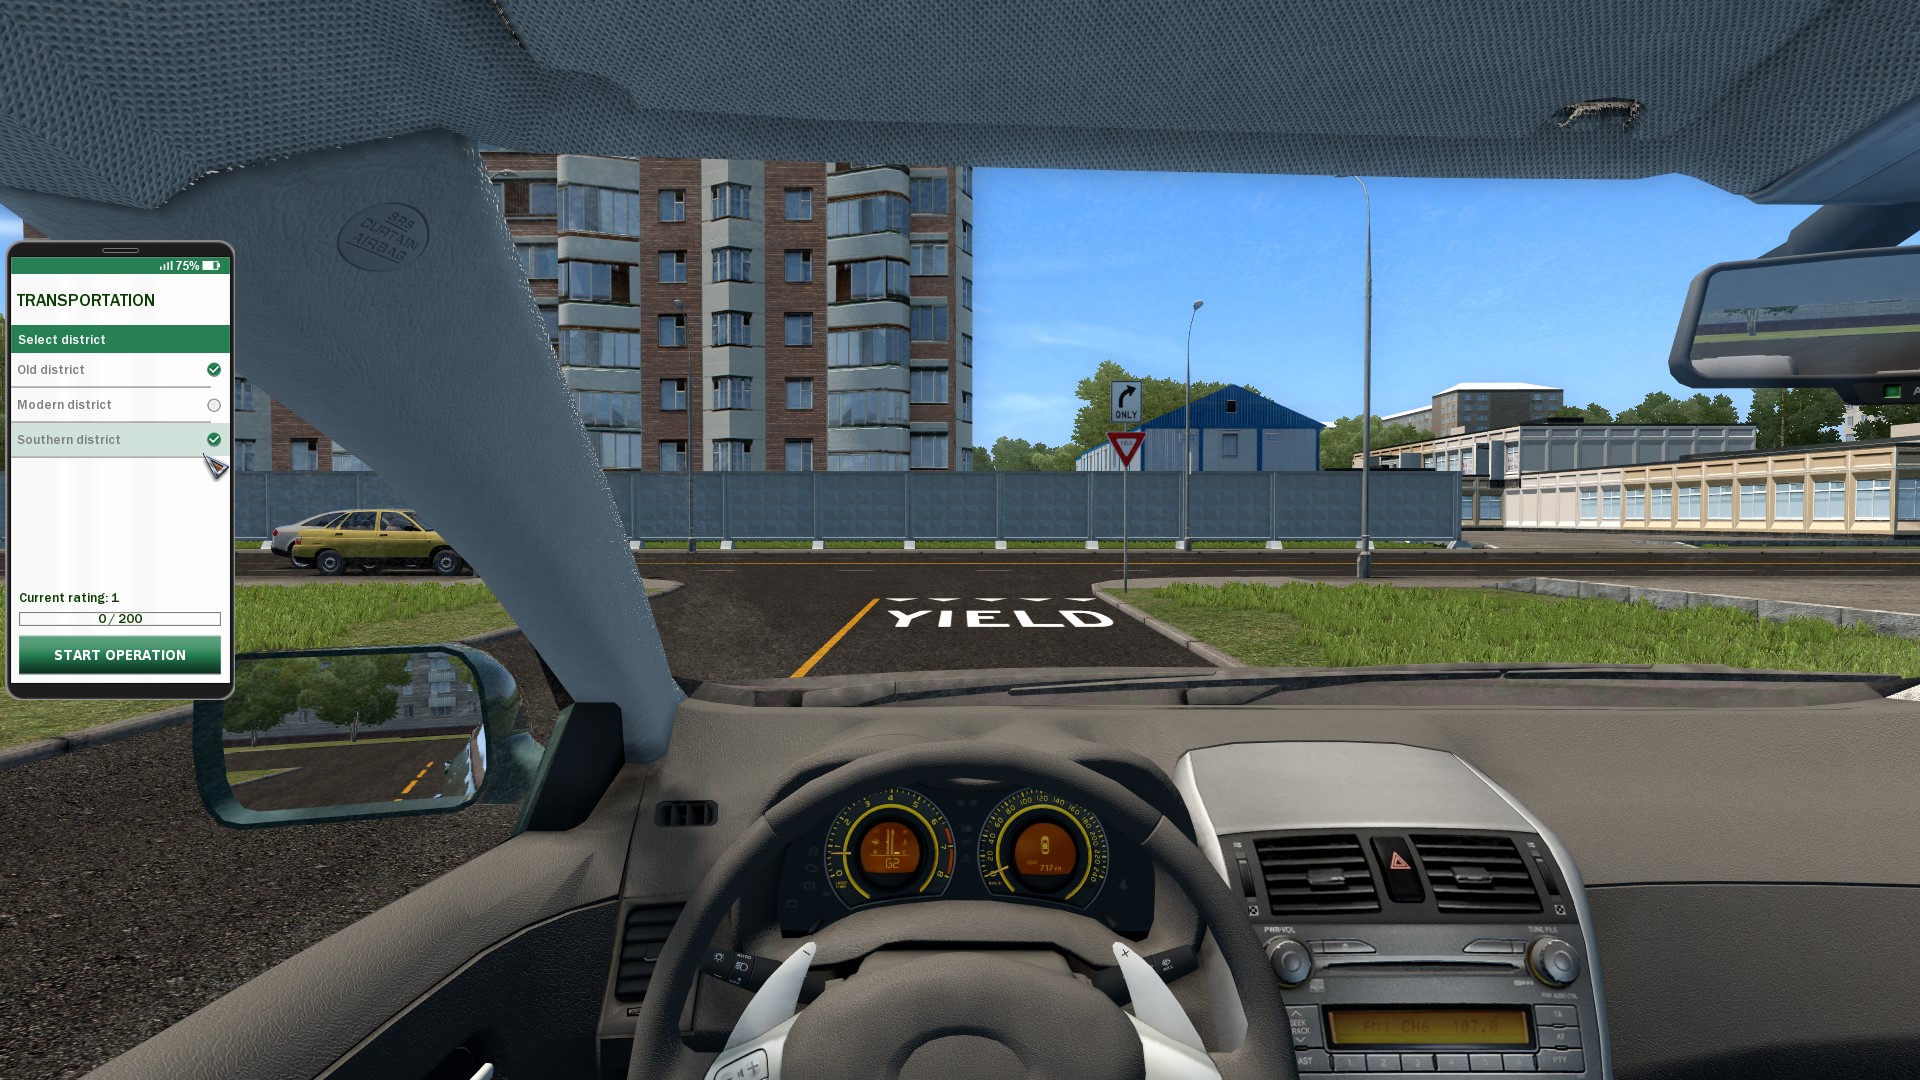 download the last version for windows City Driving 2019